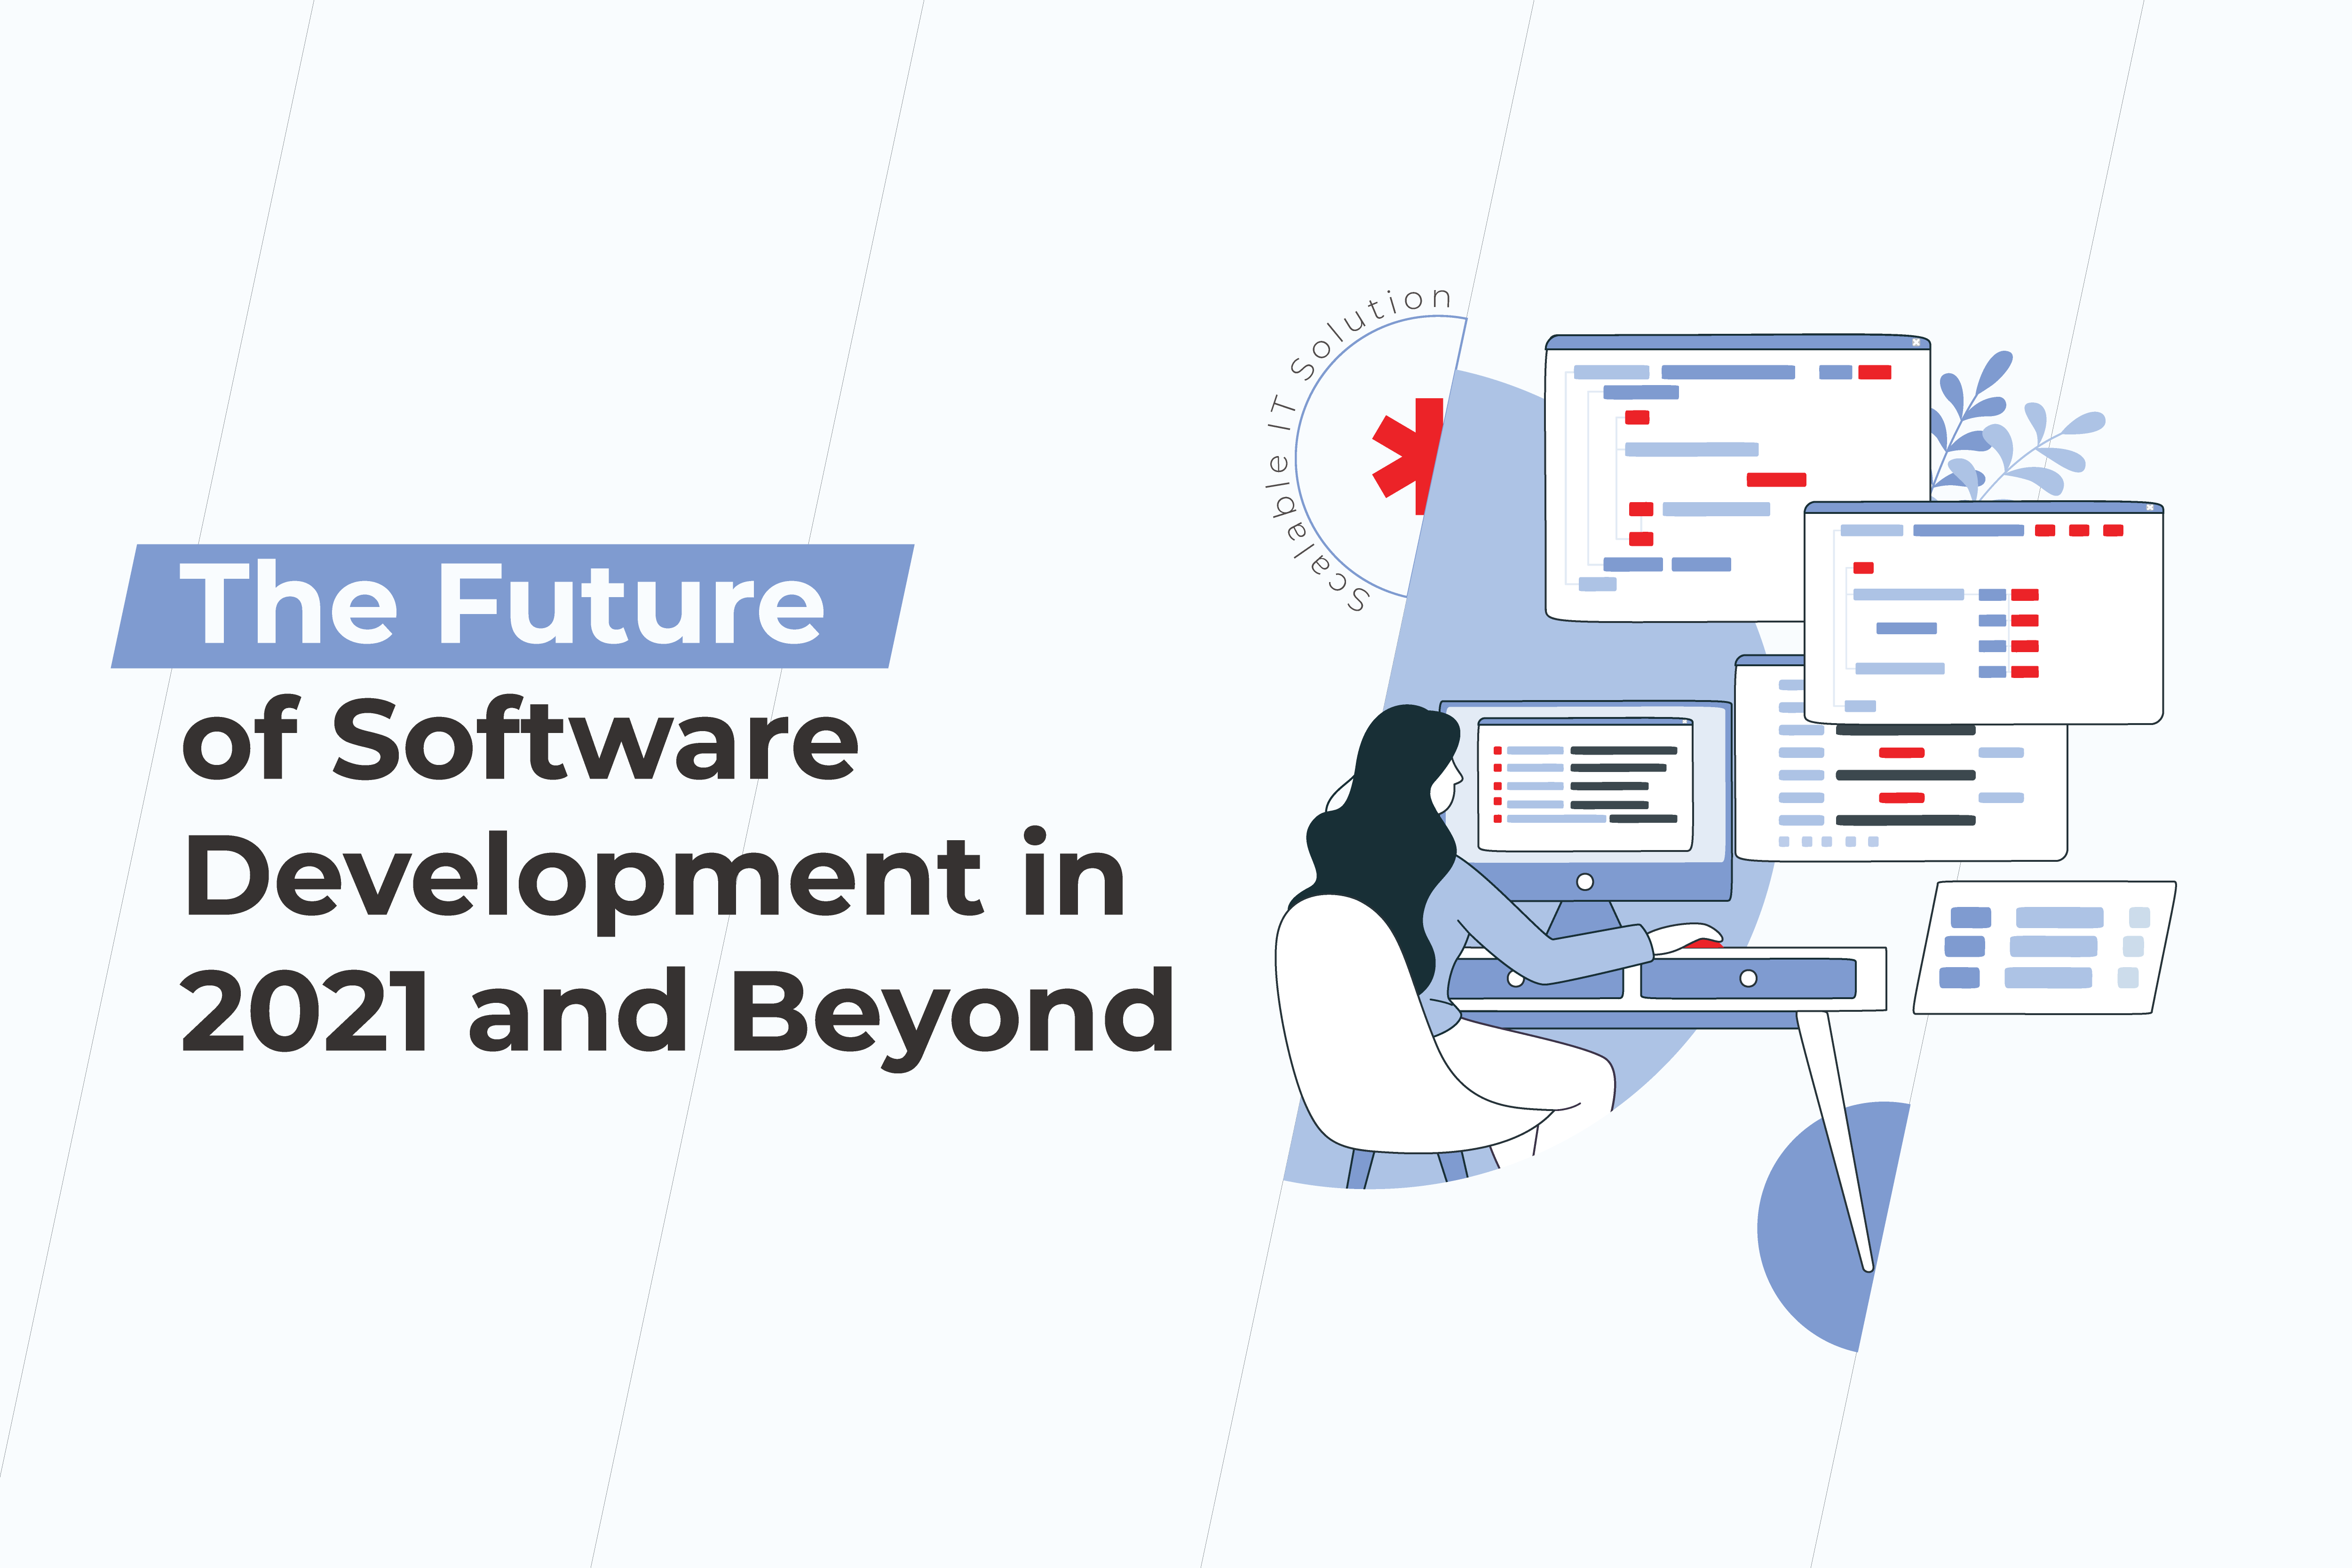 The Future of Software Development in 2021 and Beyond